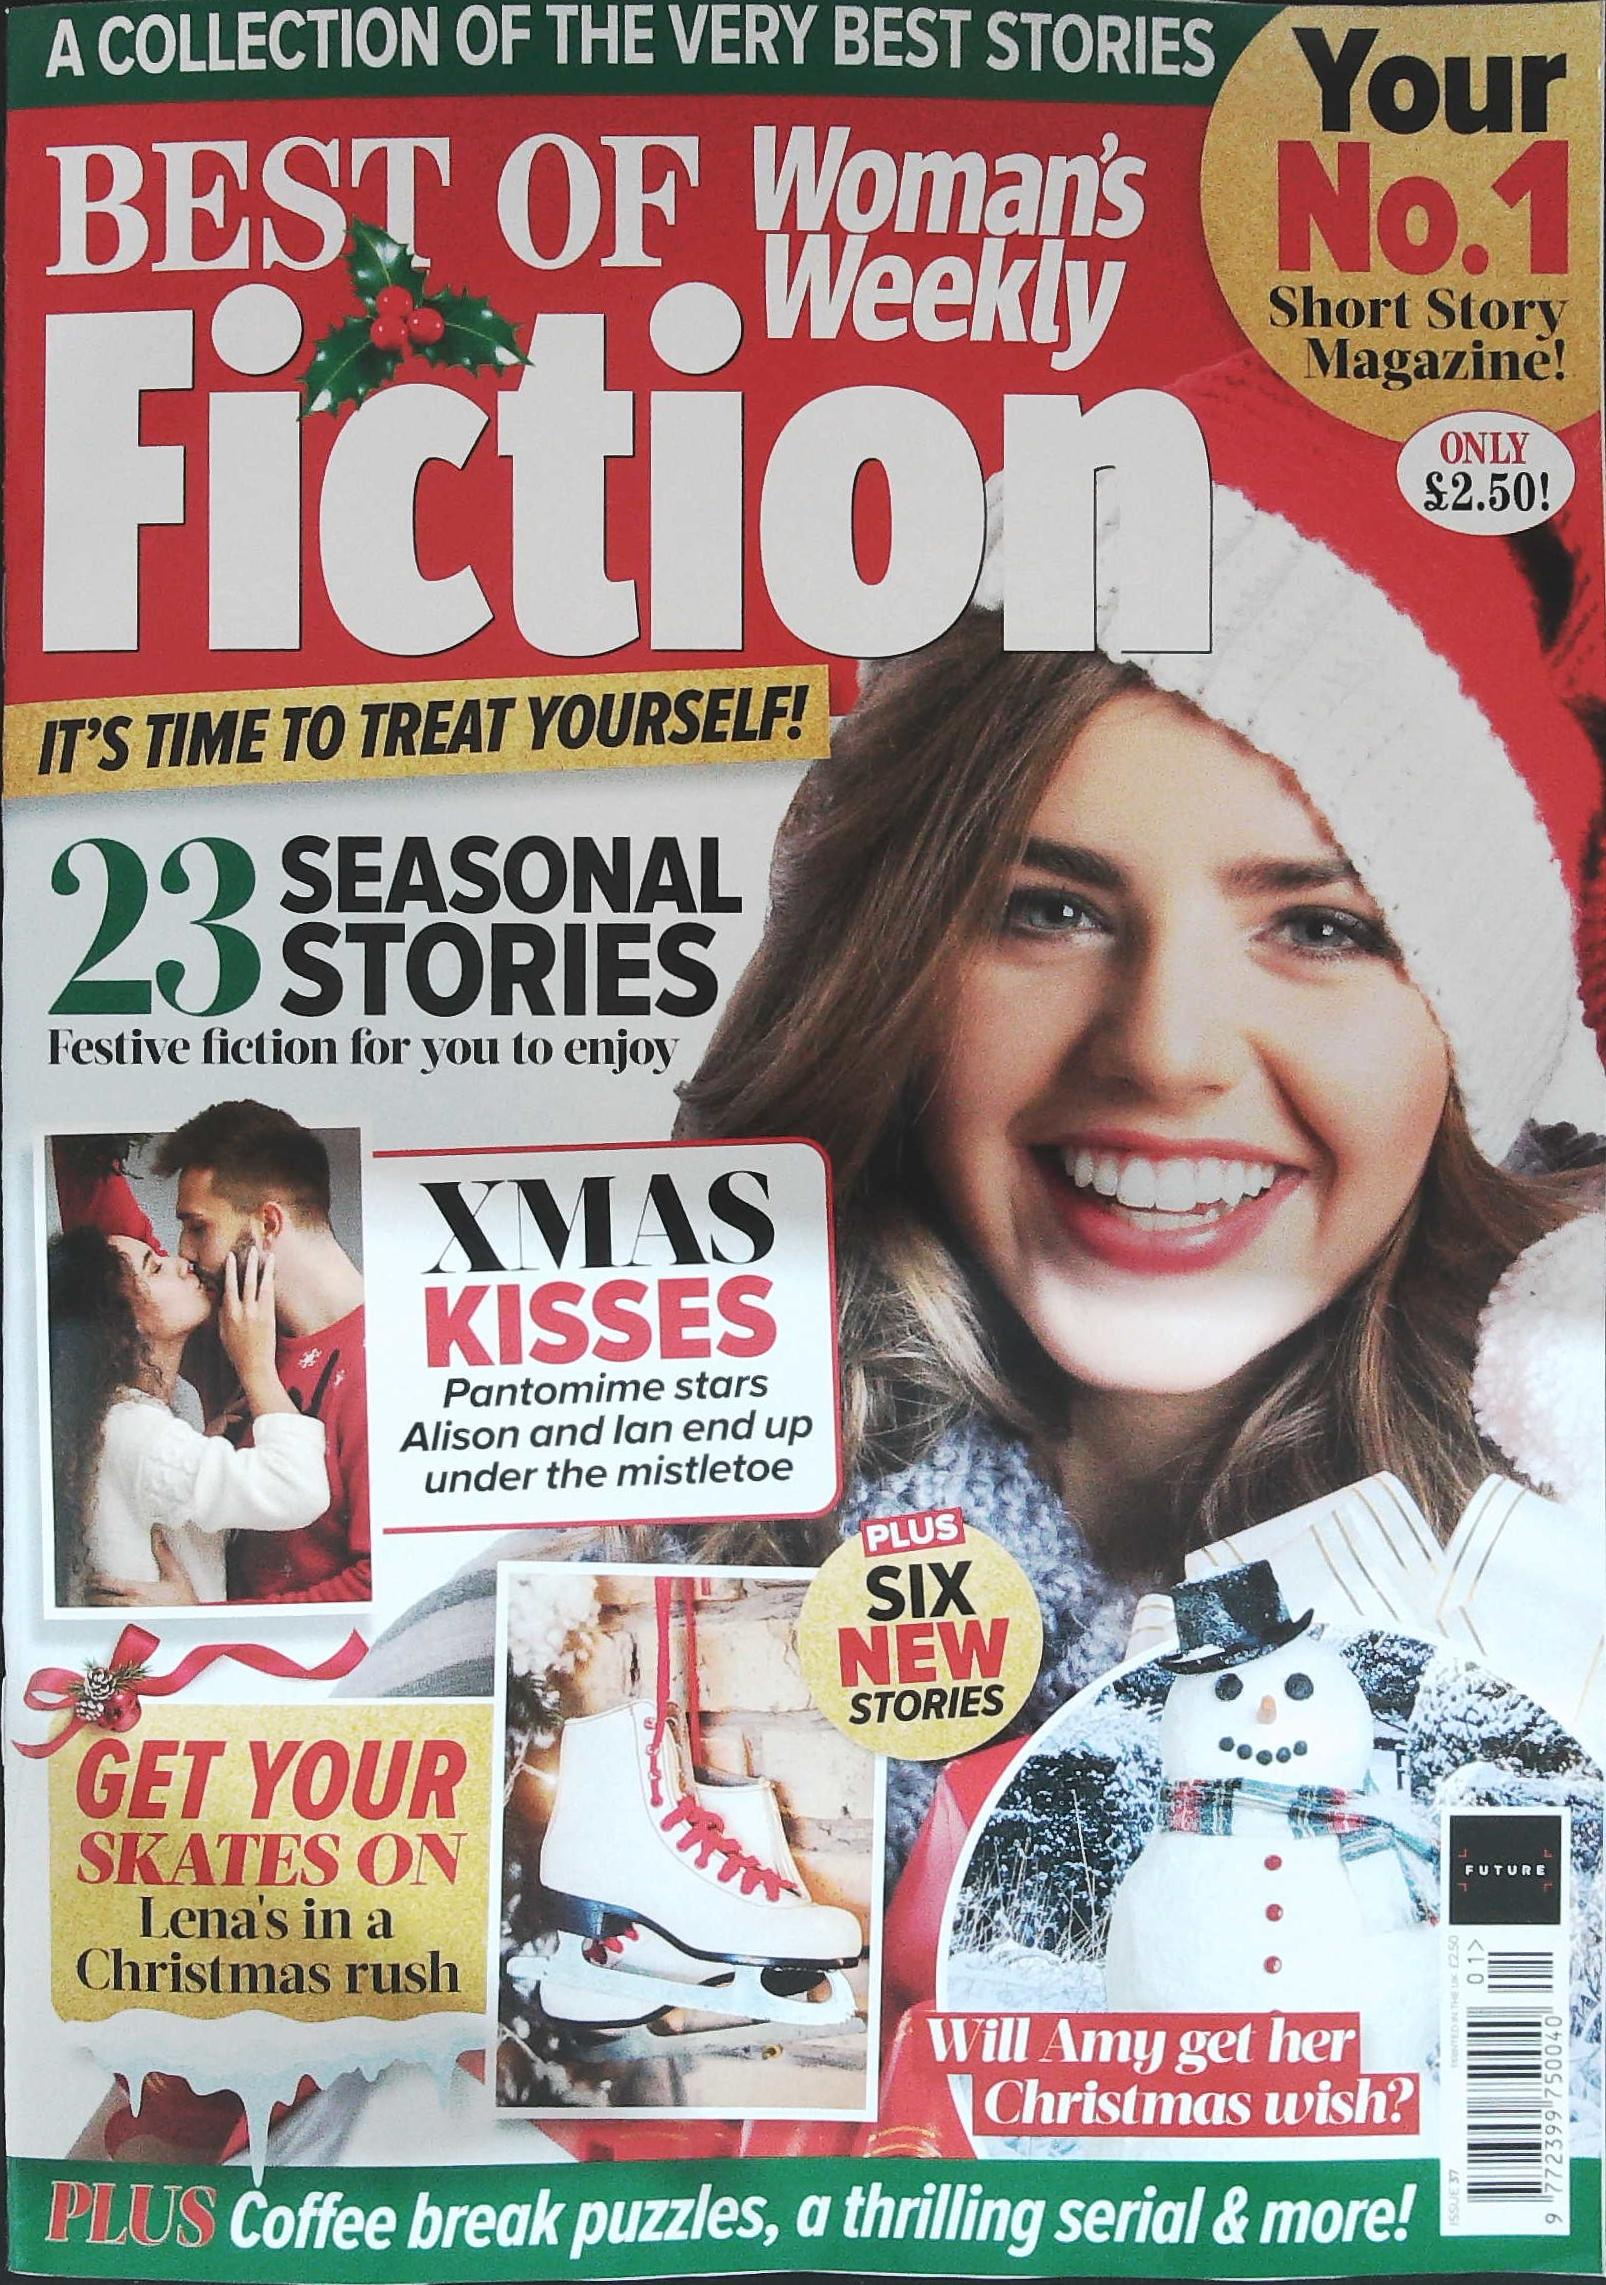 WOMANS WEEKLY FICTION